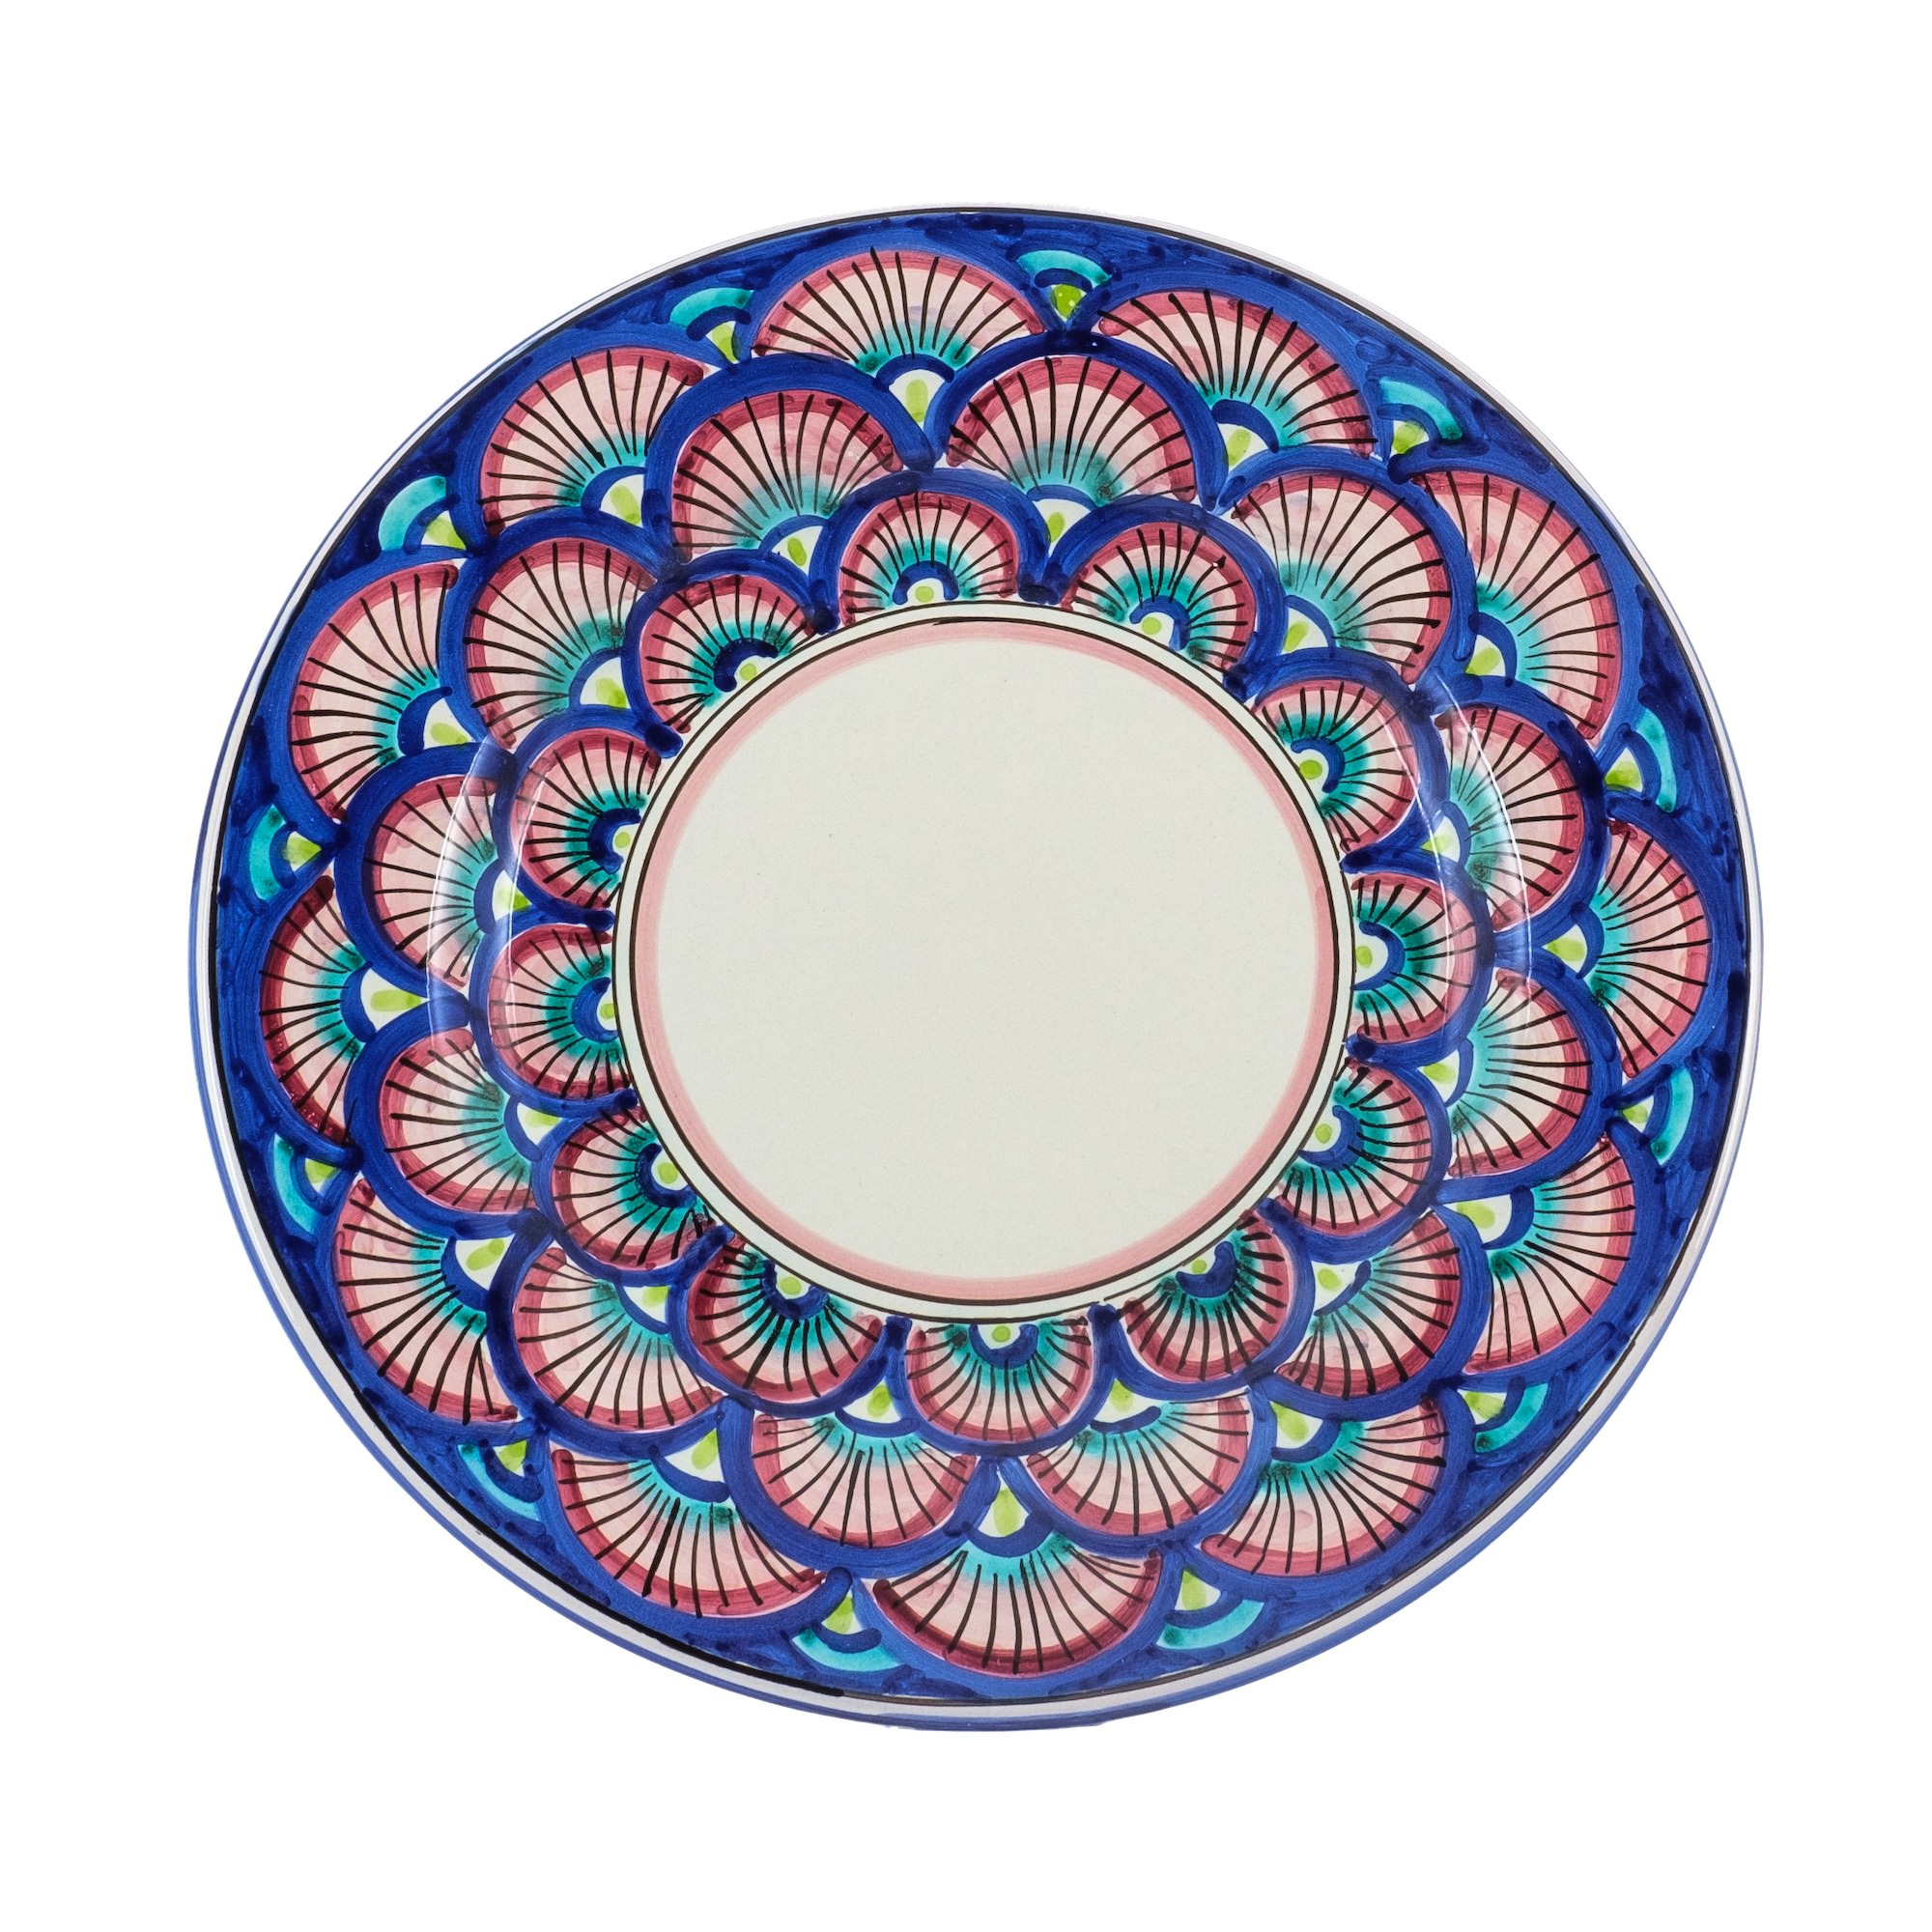 Collections dishes Ego the pink of Mozia Caltagirone - Sicilia